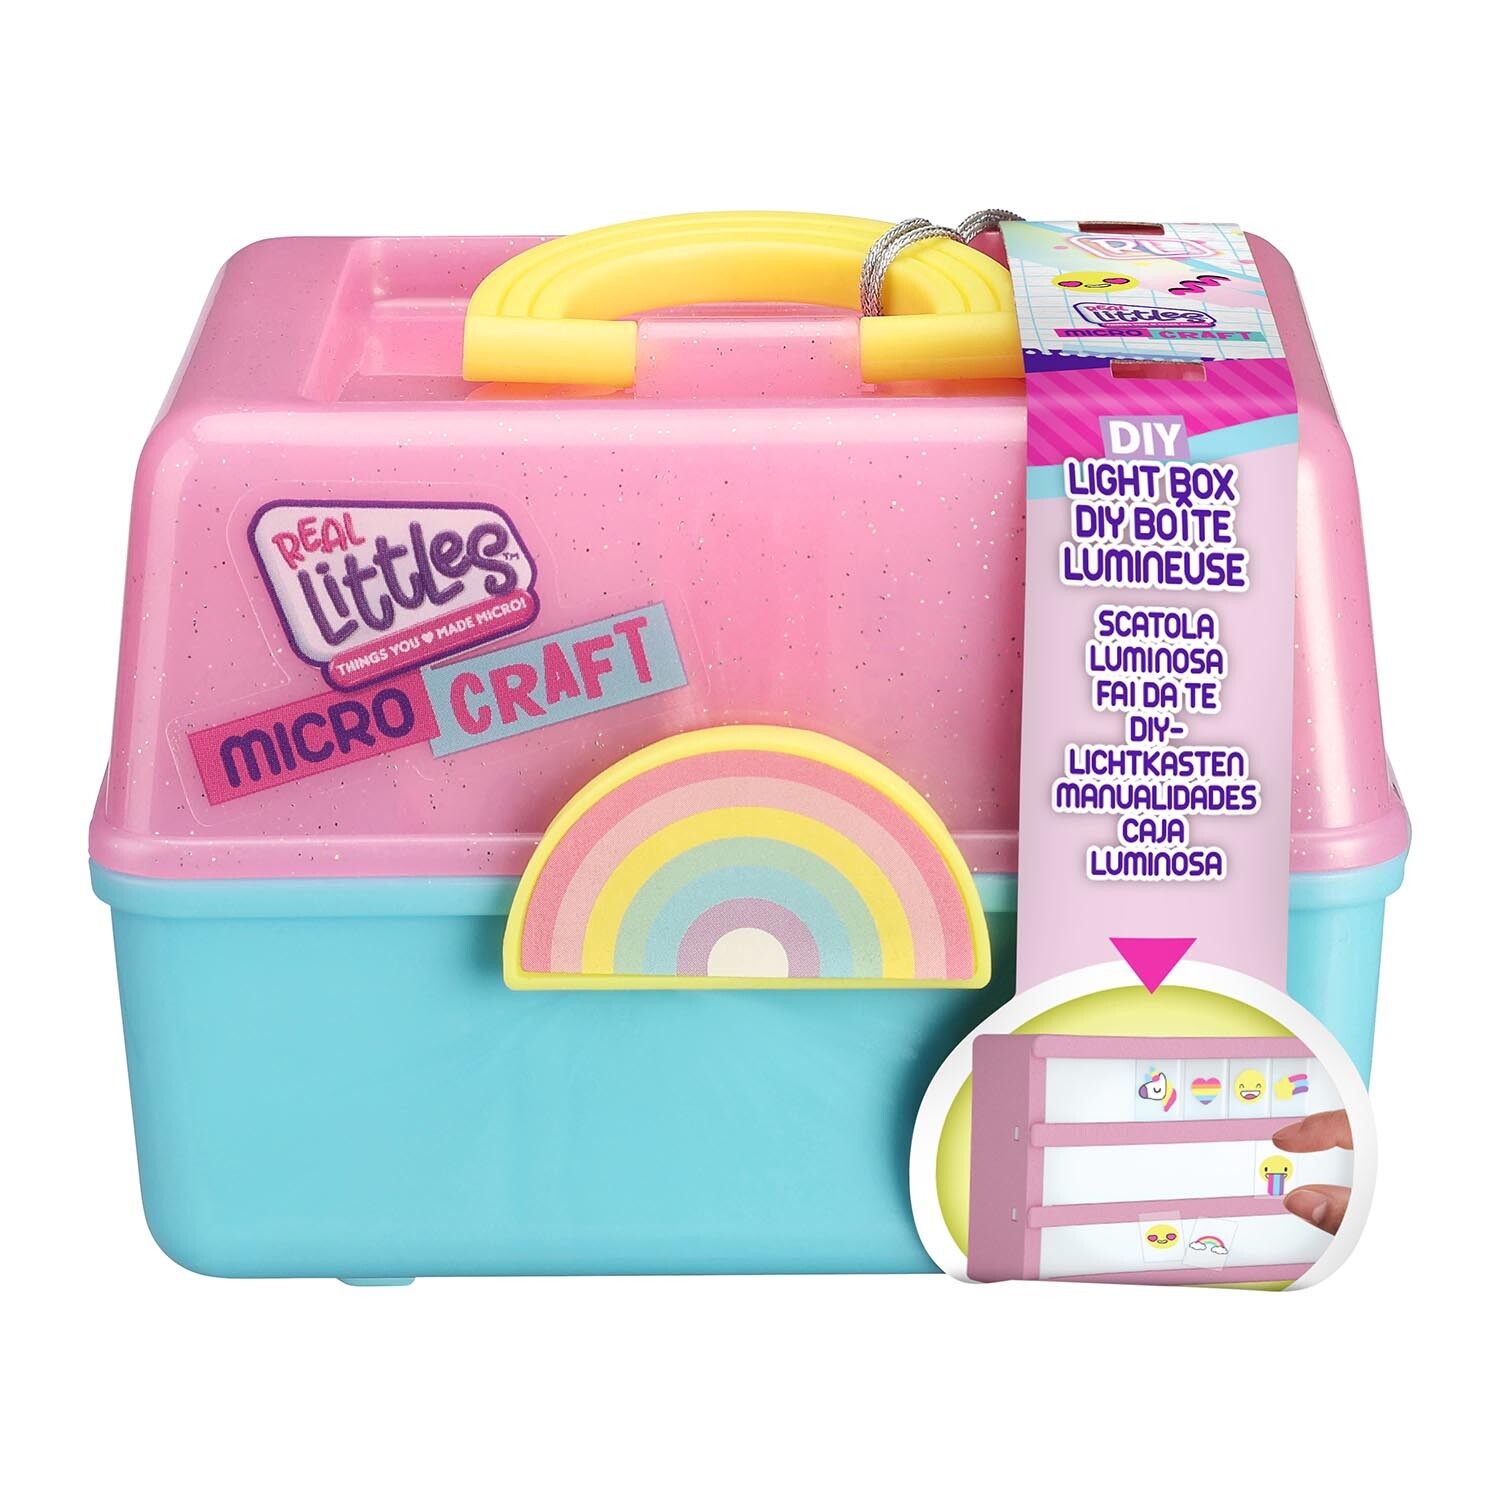 Single Real Littles Micro Craft Box in Assorted styles Image 1